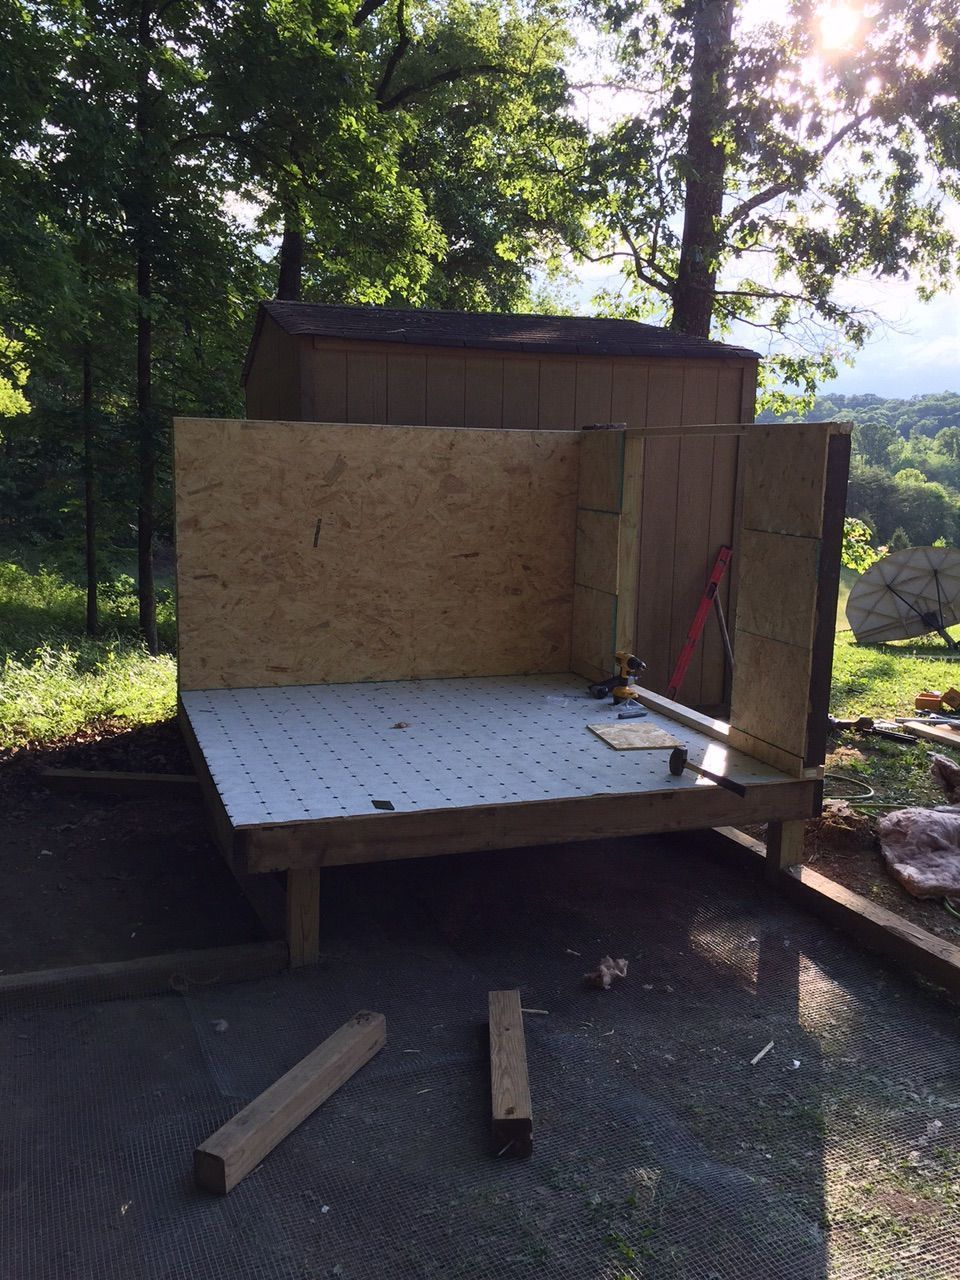 Large door on one side for easy access for cleaning the coop